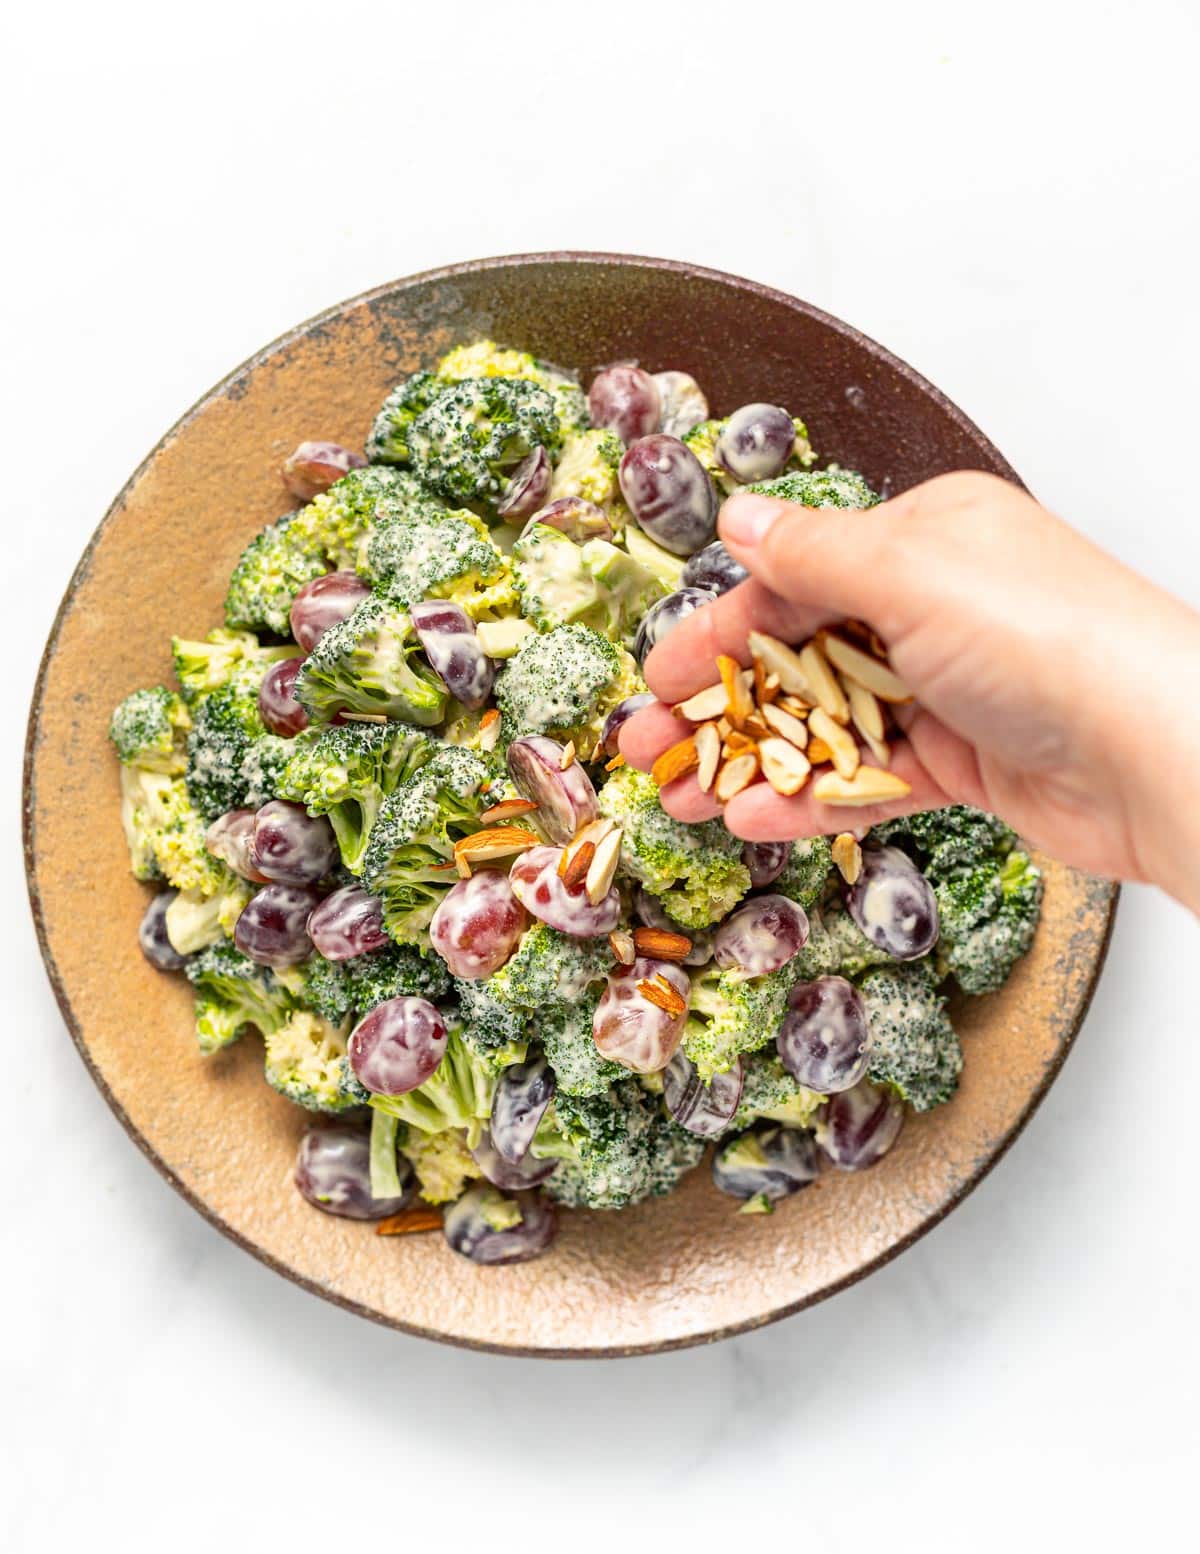 a plate full of vegan broccoli salad with a hand sprinkling over slivered almonds 